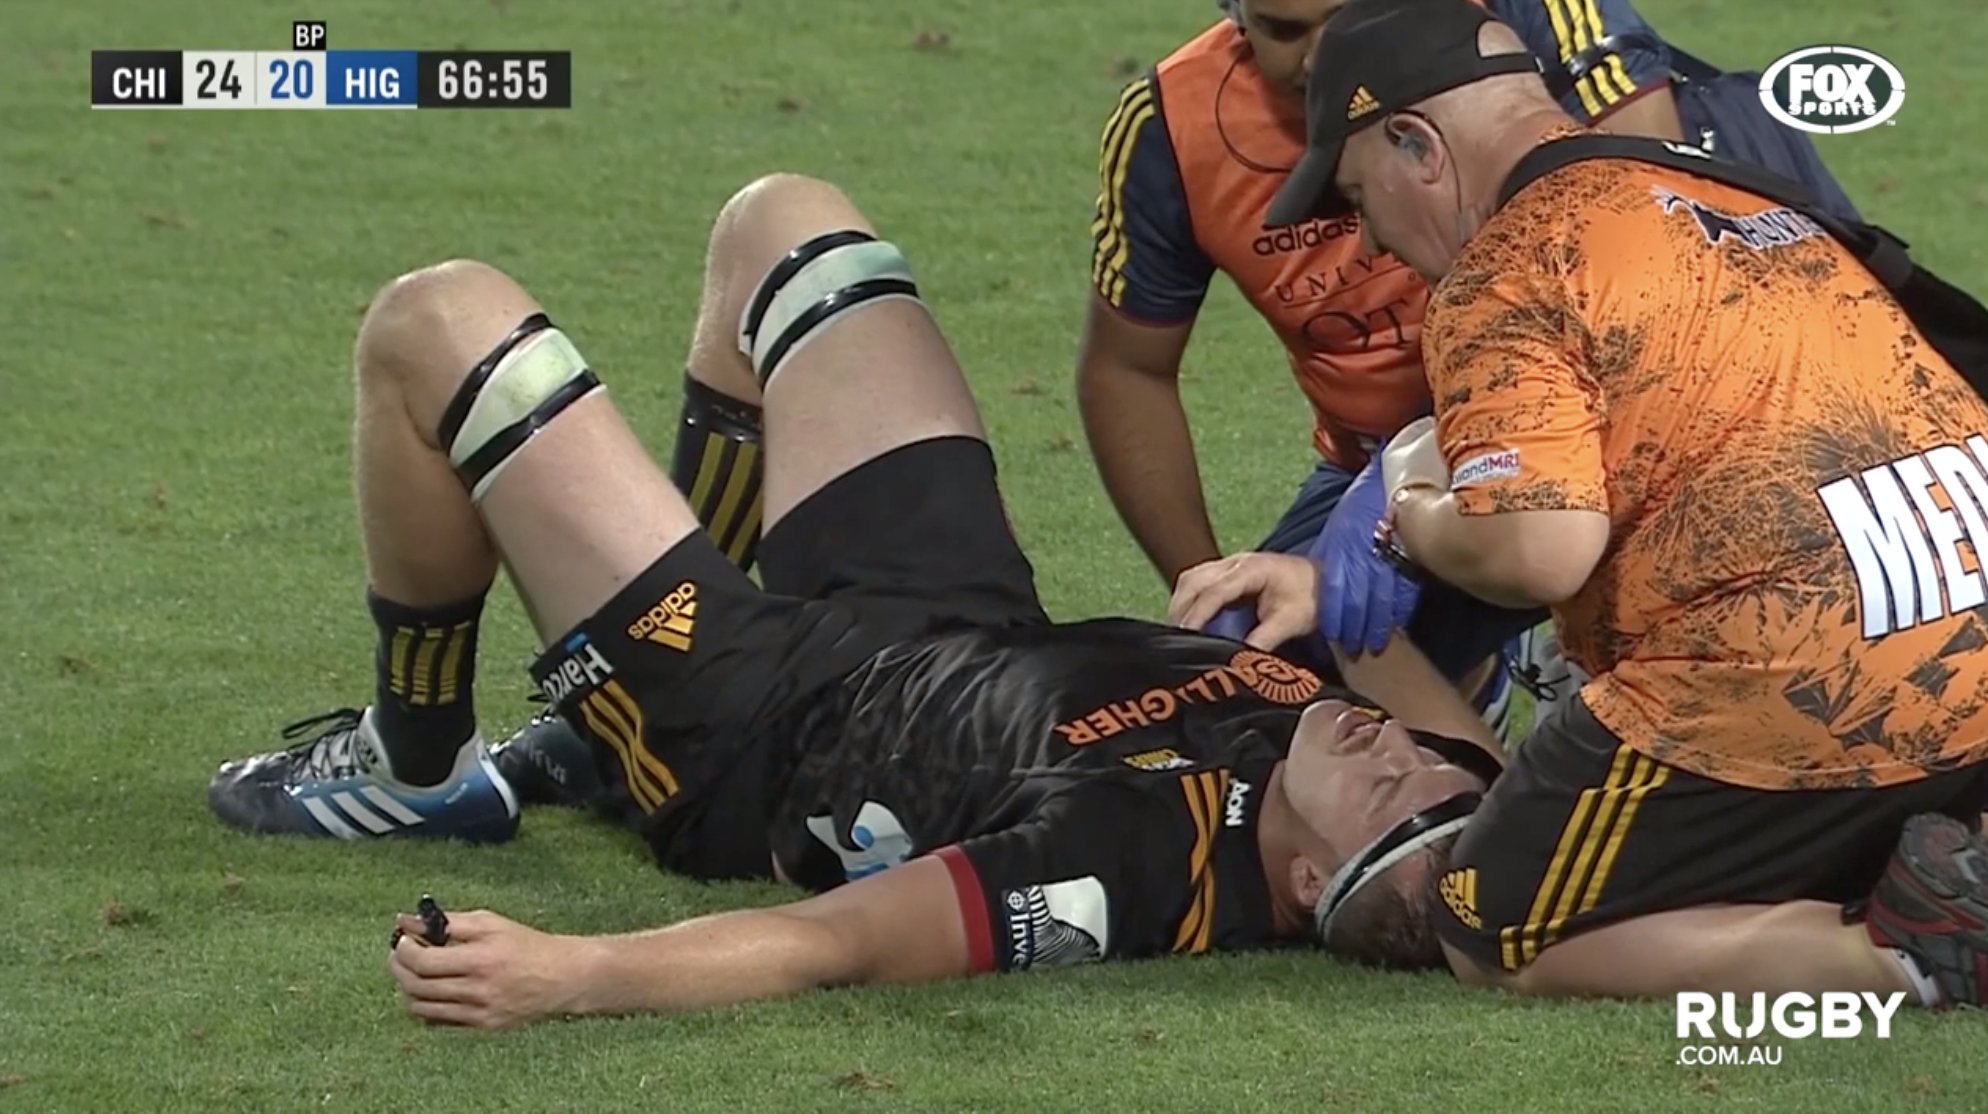 WATCH: Brodie Retallick gets absolutely SMOKED in first game of Super Rugby season